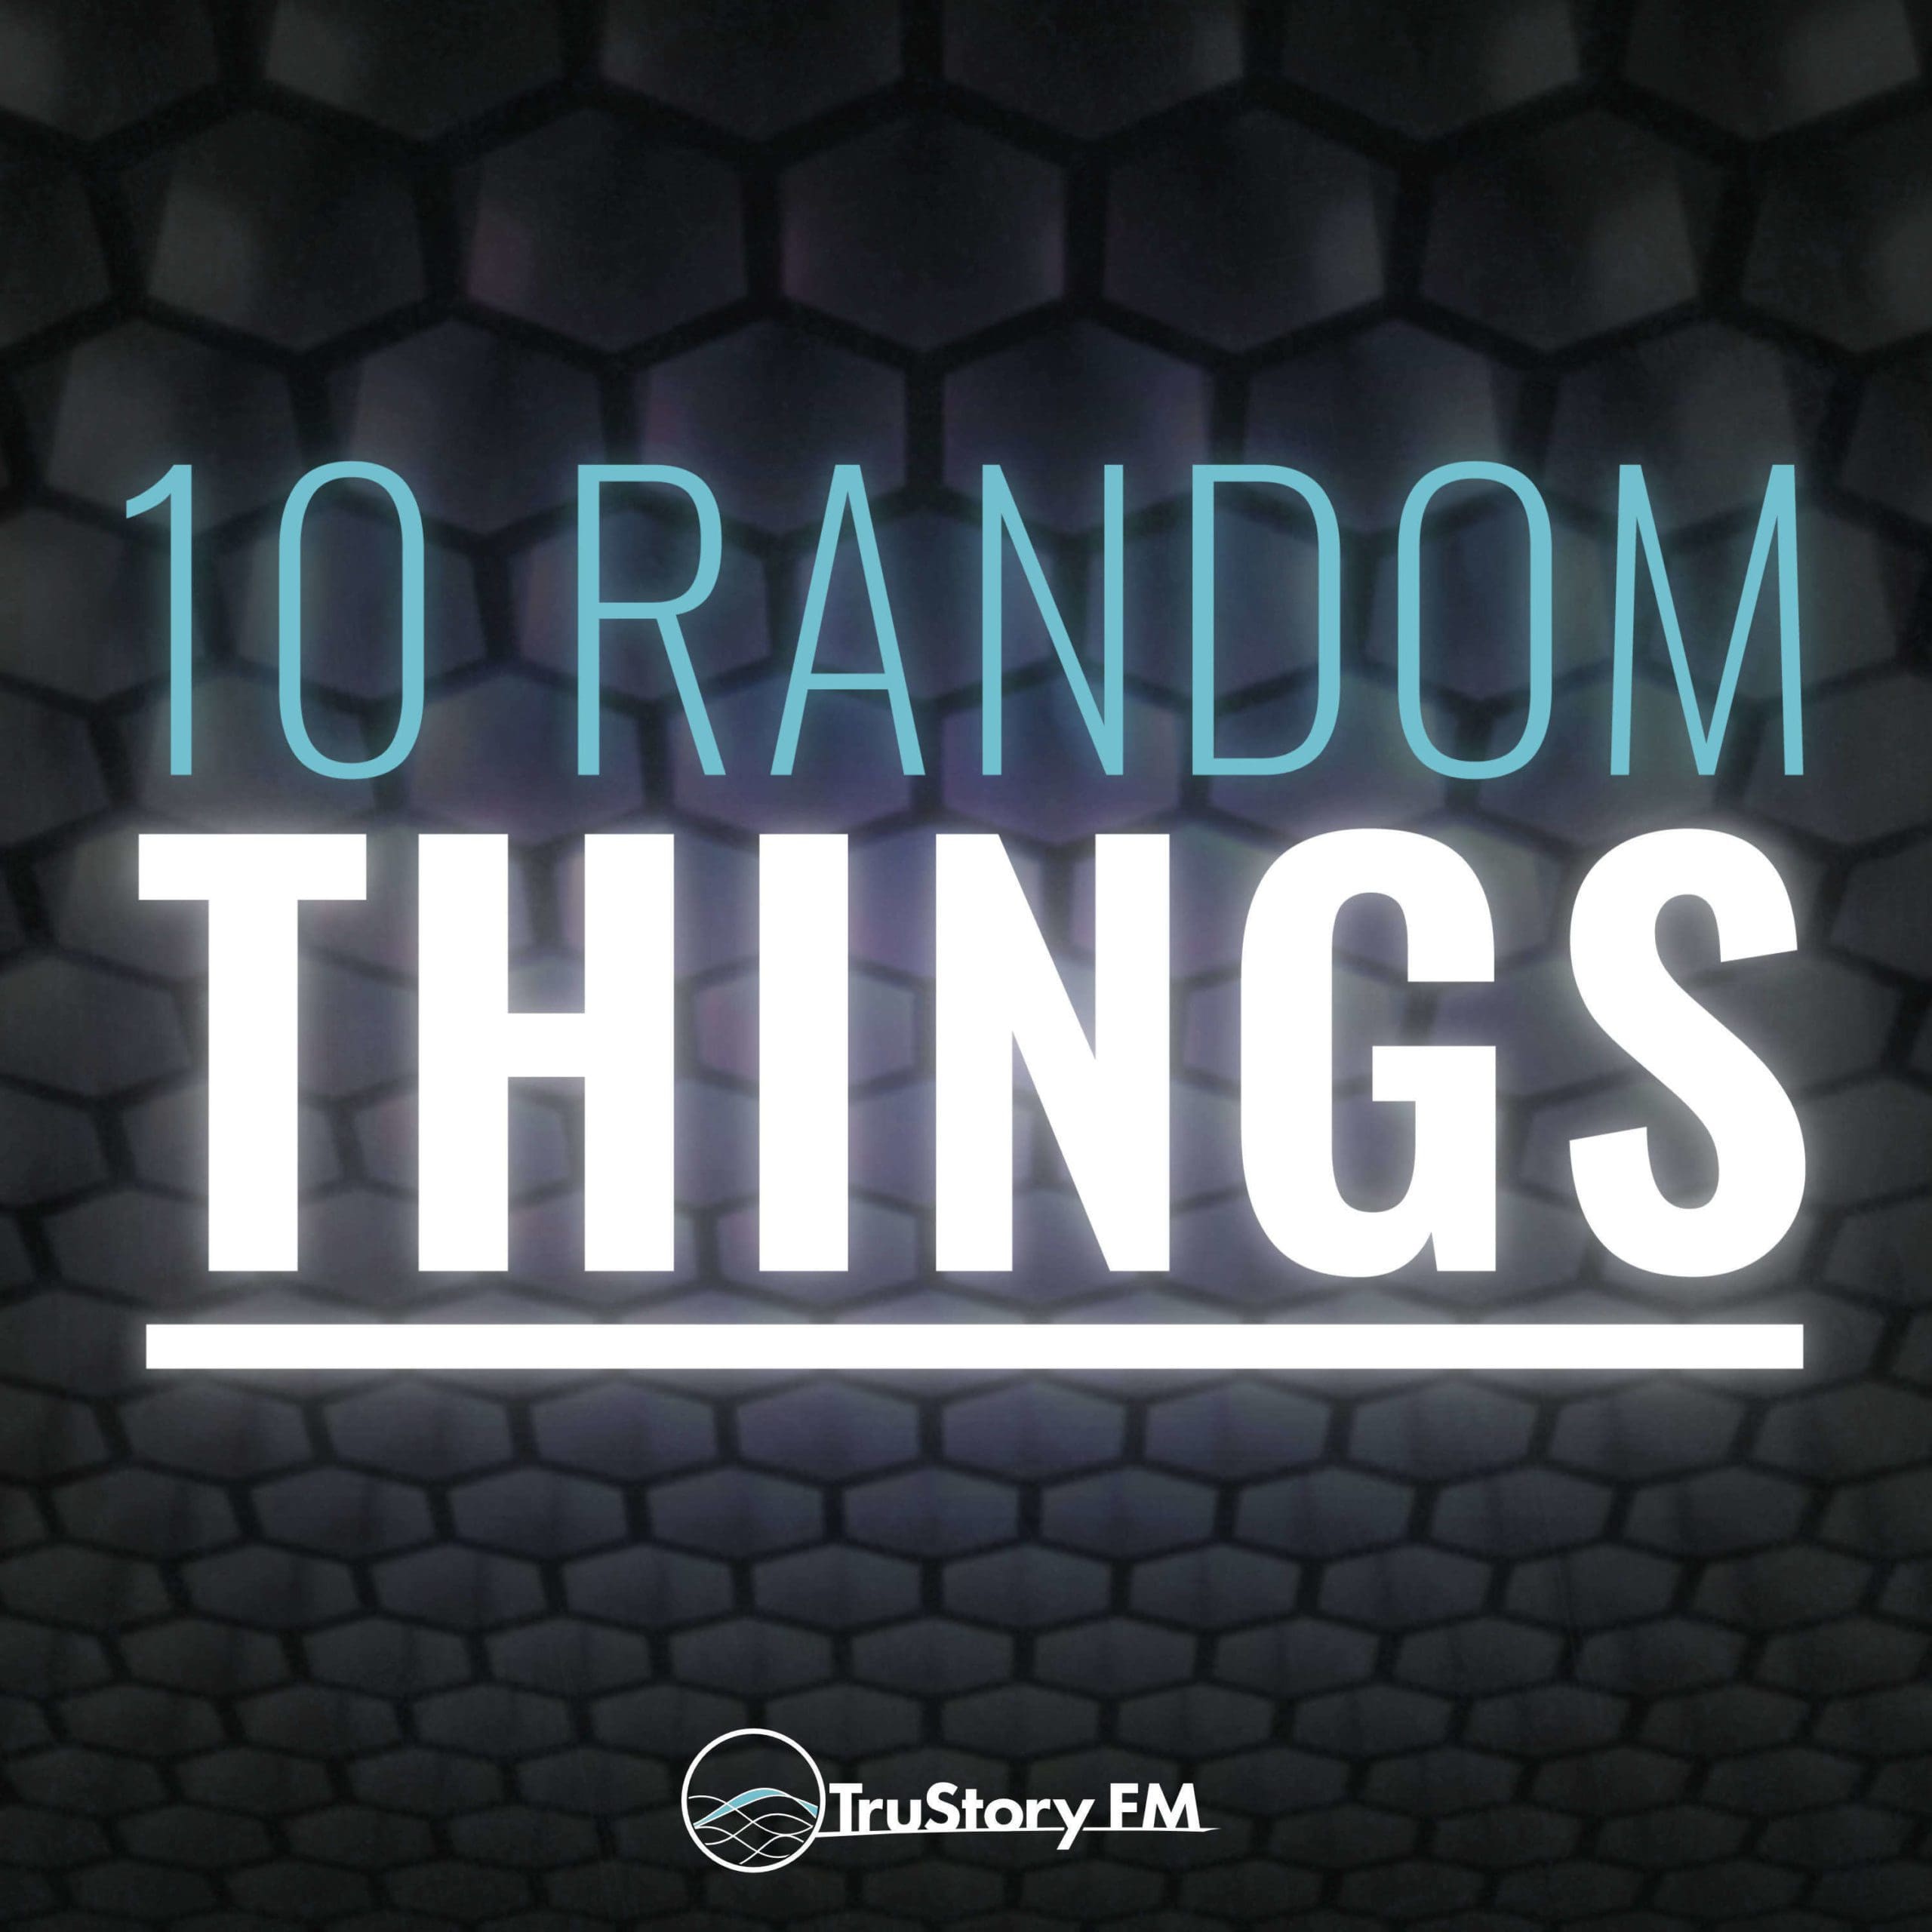 The 10 Random Things Mysterious Introduction